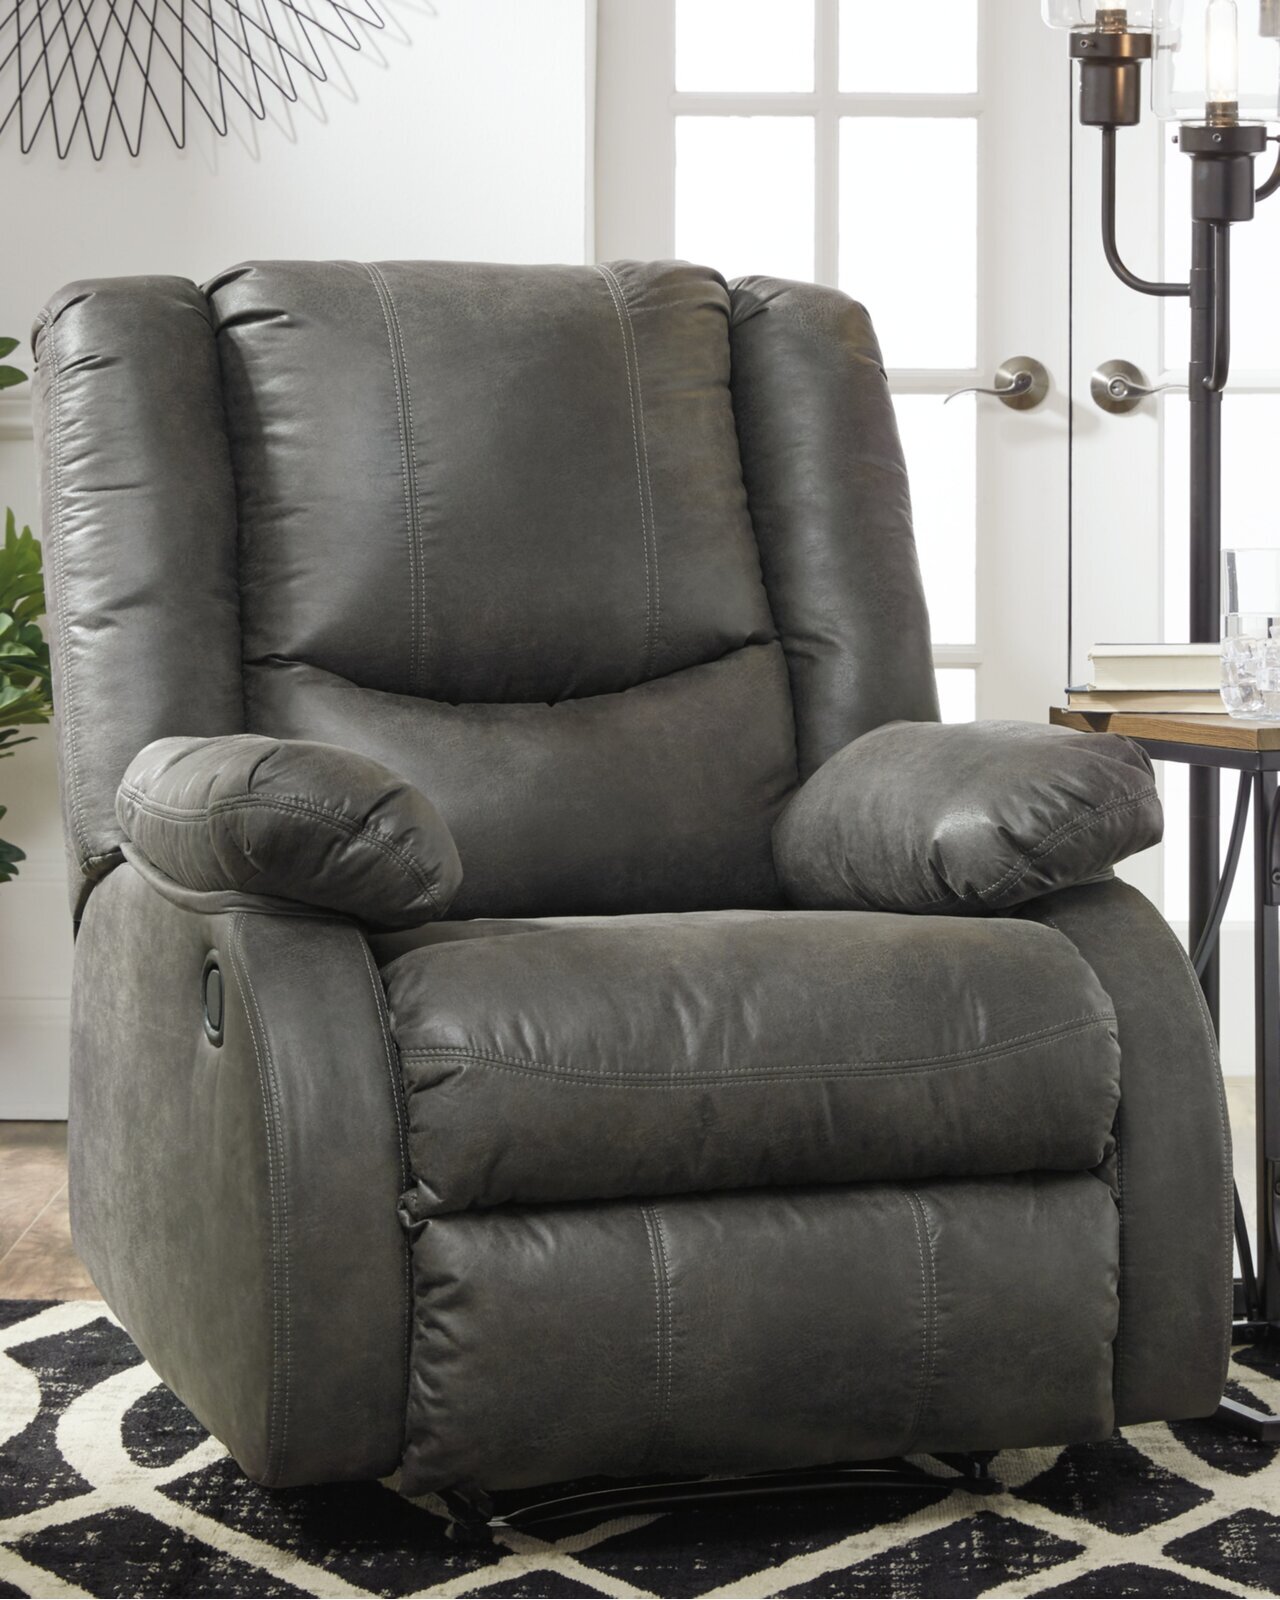 Chic Gray Small Wall Hugger Recliner for Small Spaces